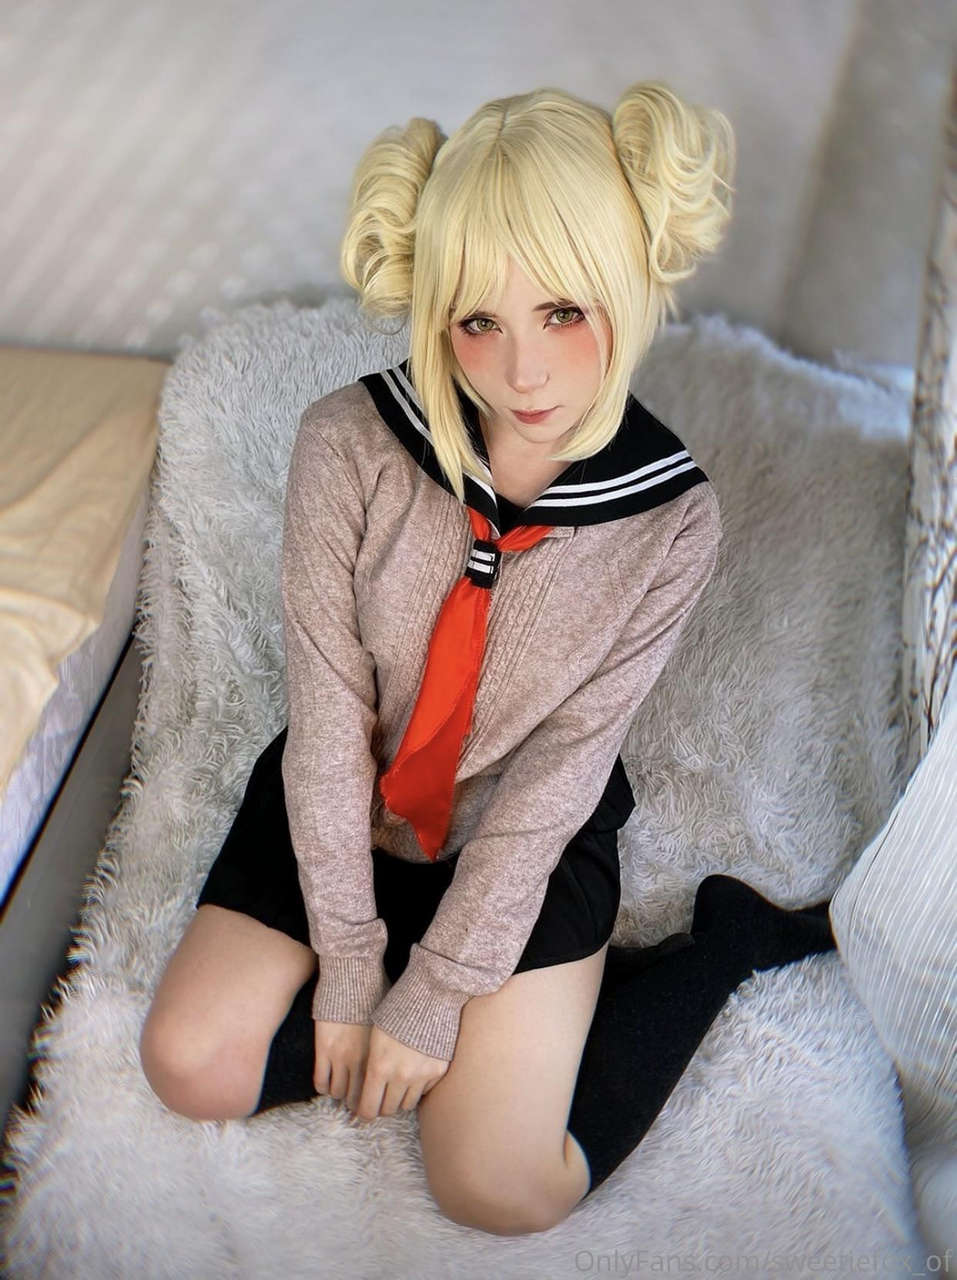 Since You Liked My Toga Heres The Full Outfit 3 0